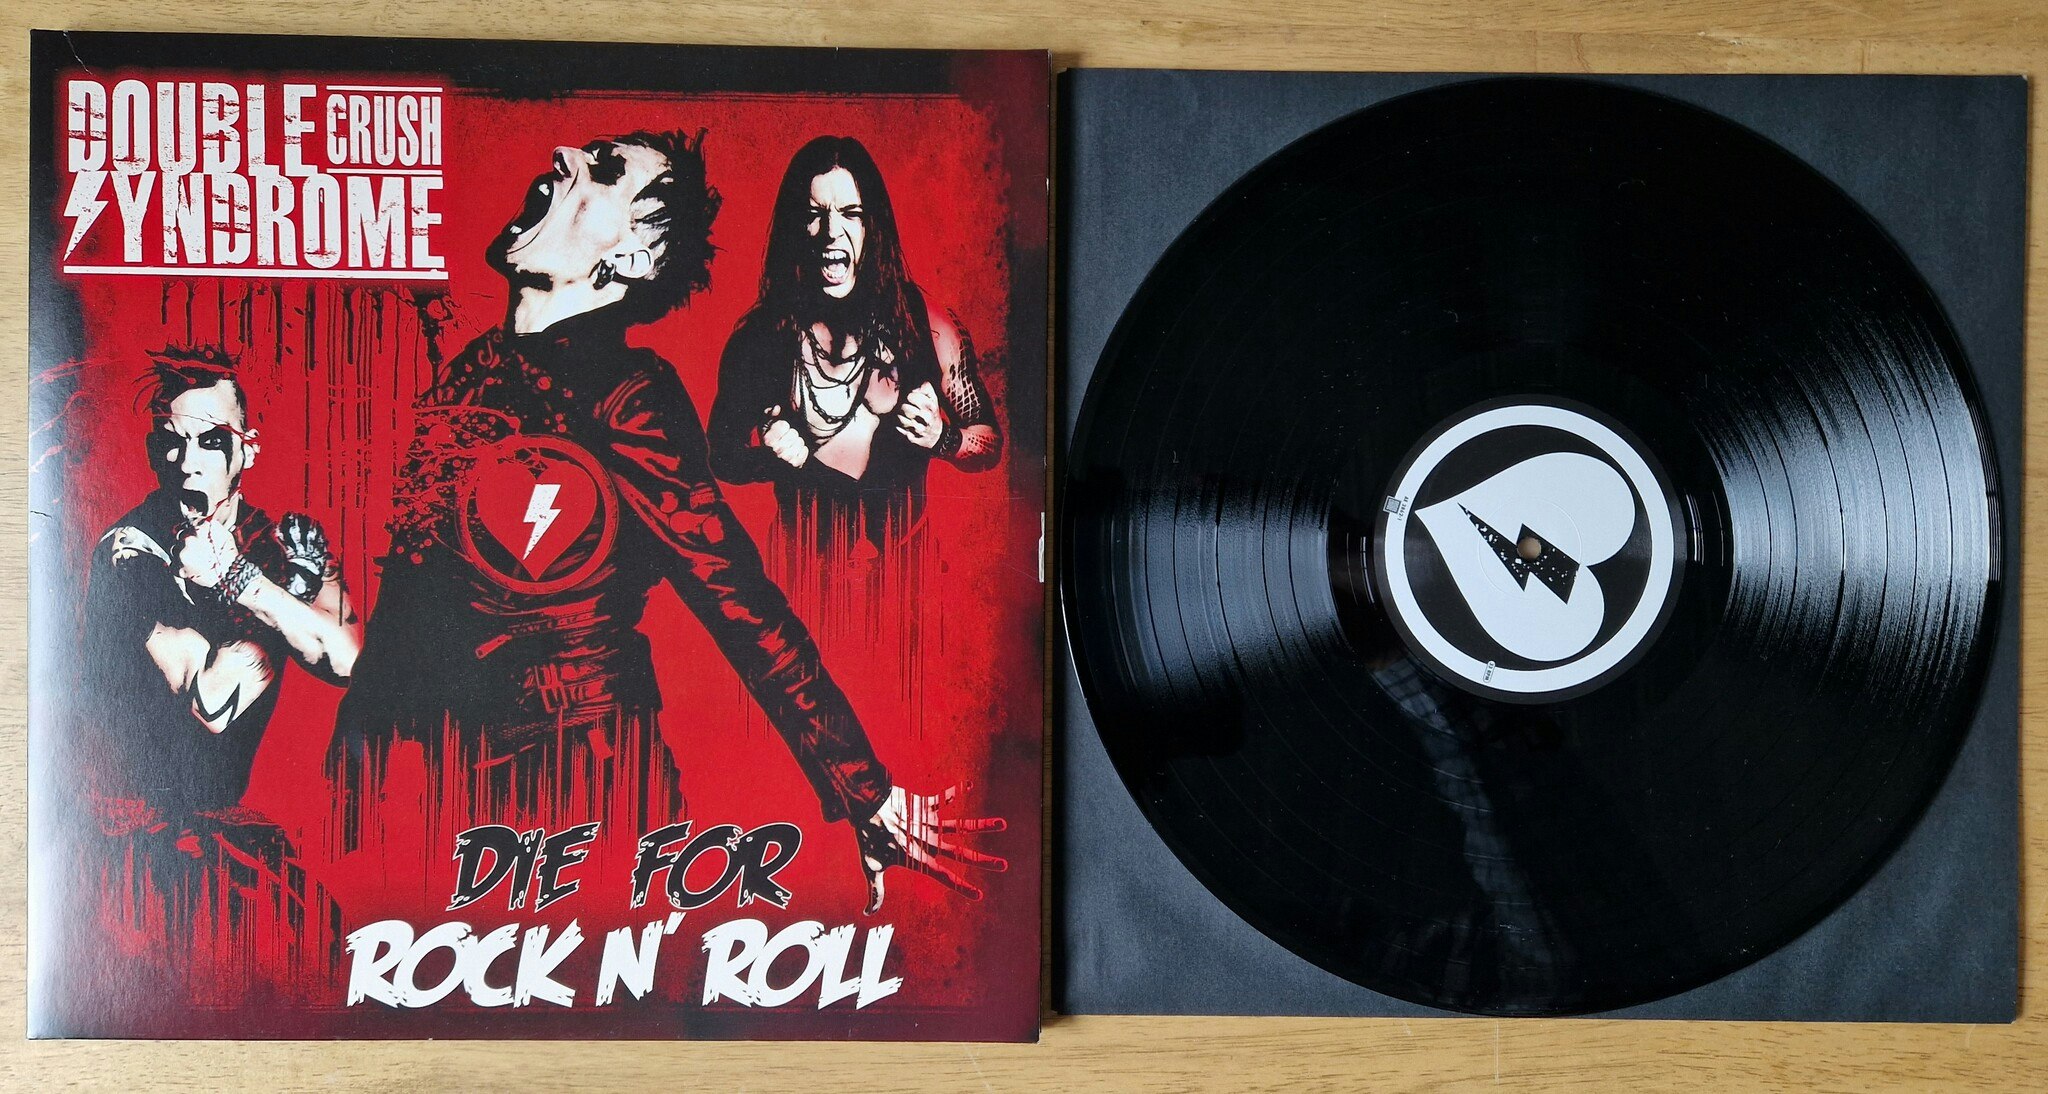 Double Crush Syndrome, Die for rock'n roll. Vinyl LP